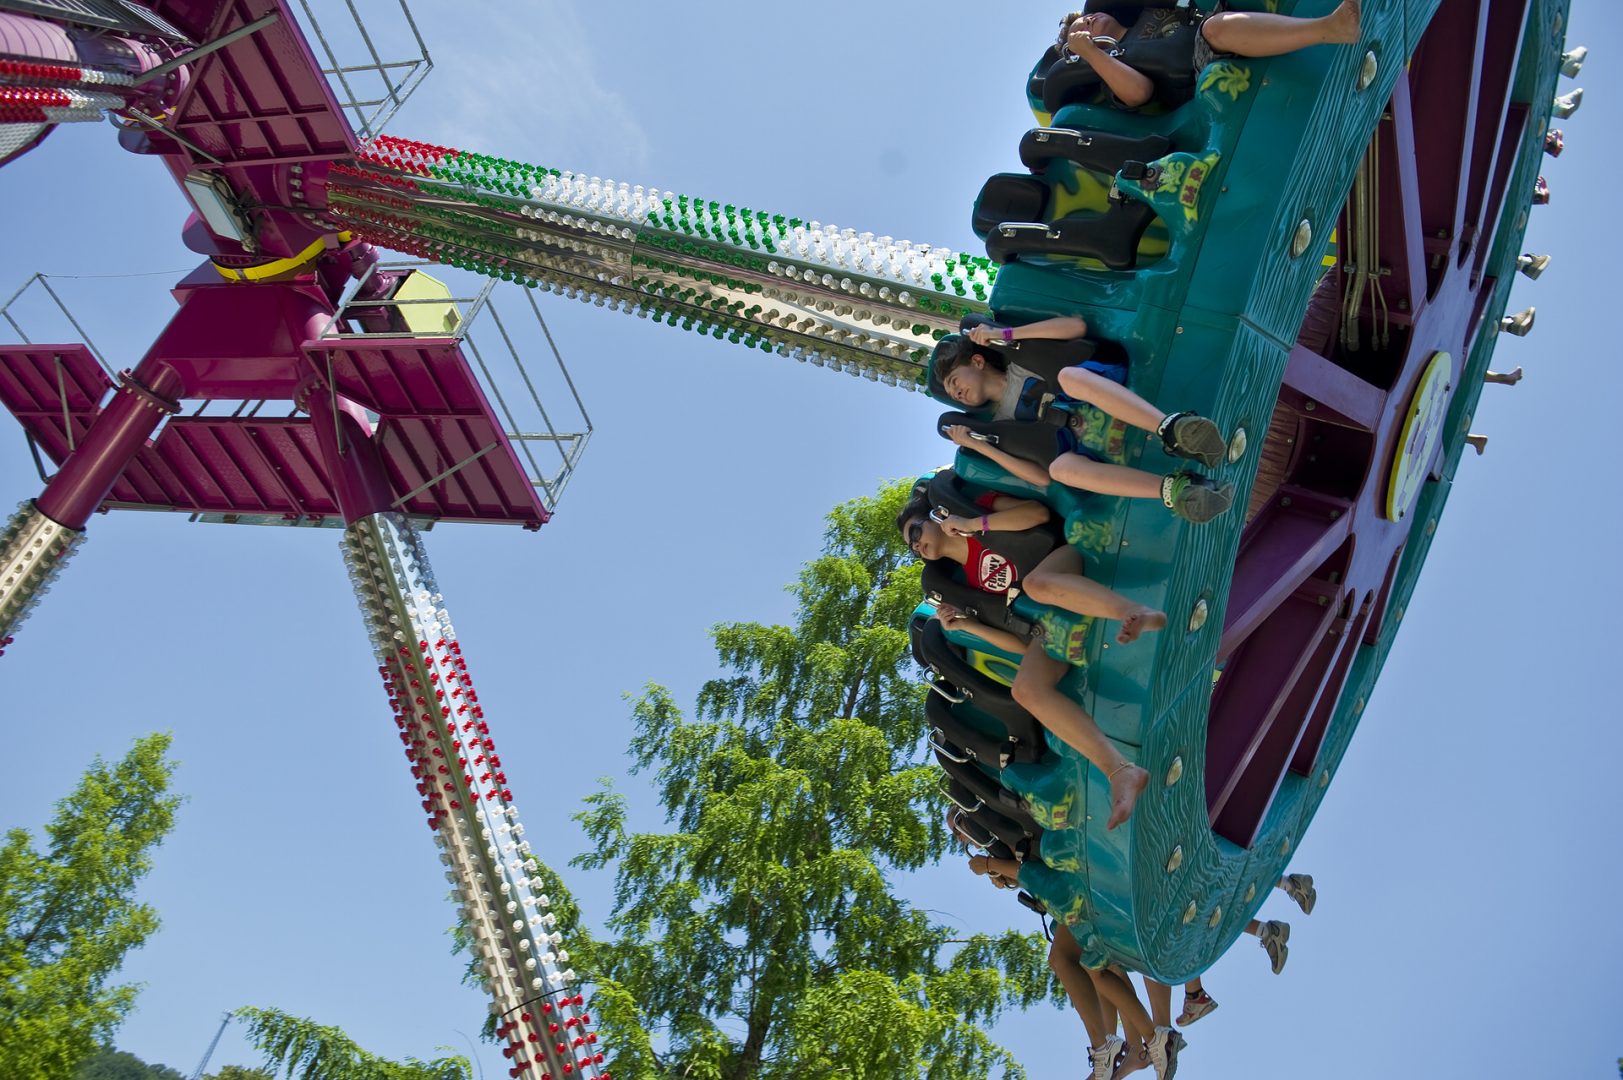 Amusement Parks in Pennsylvania  Pennsylvania Amusement Parks and  Attractions